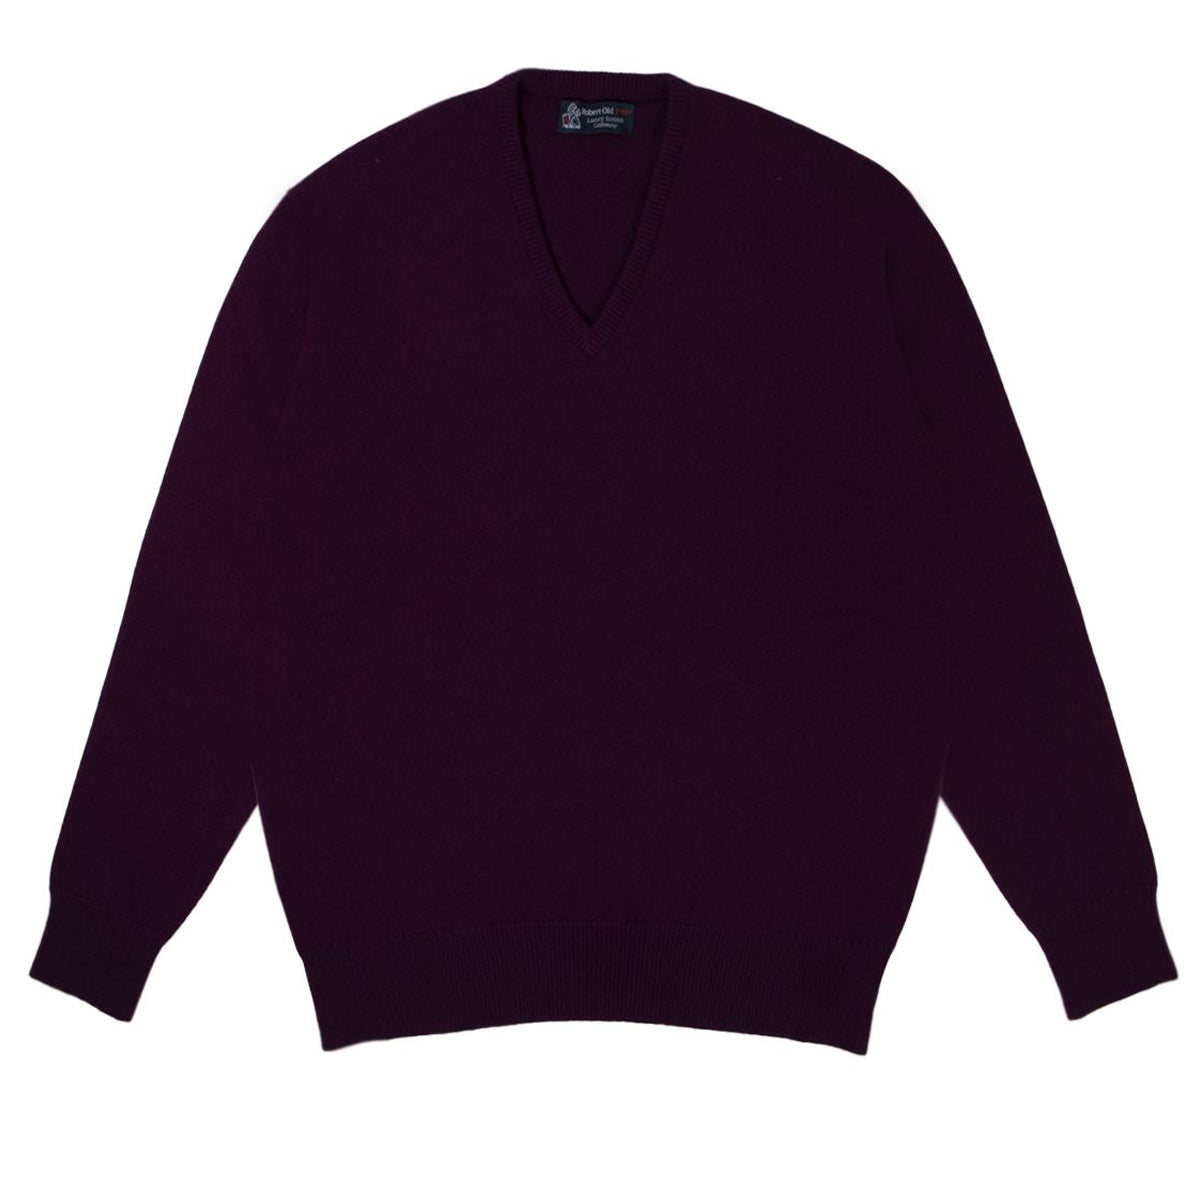 Beetroot Tobermorey 4ply V-Neck Cashmere Sweater  Robert Old   